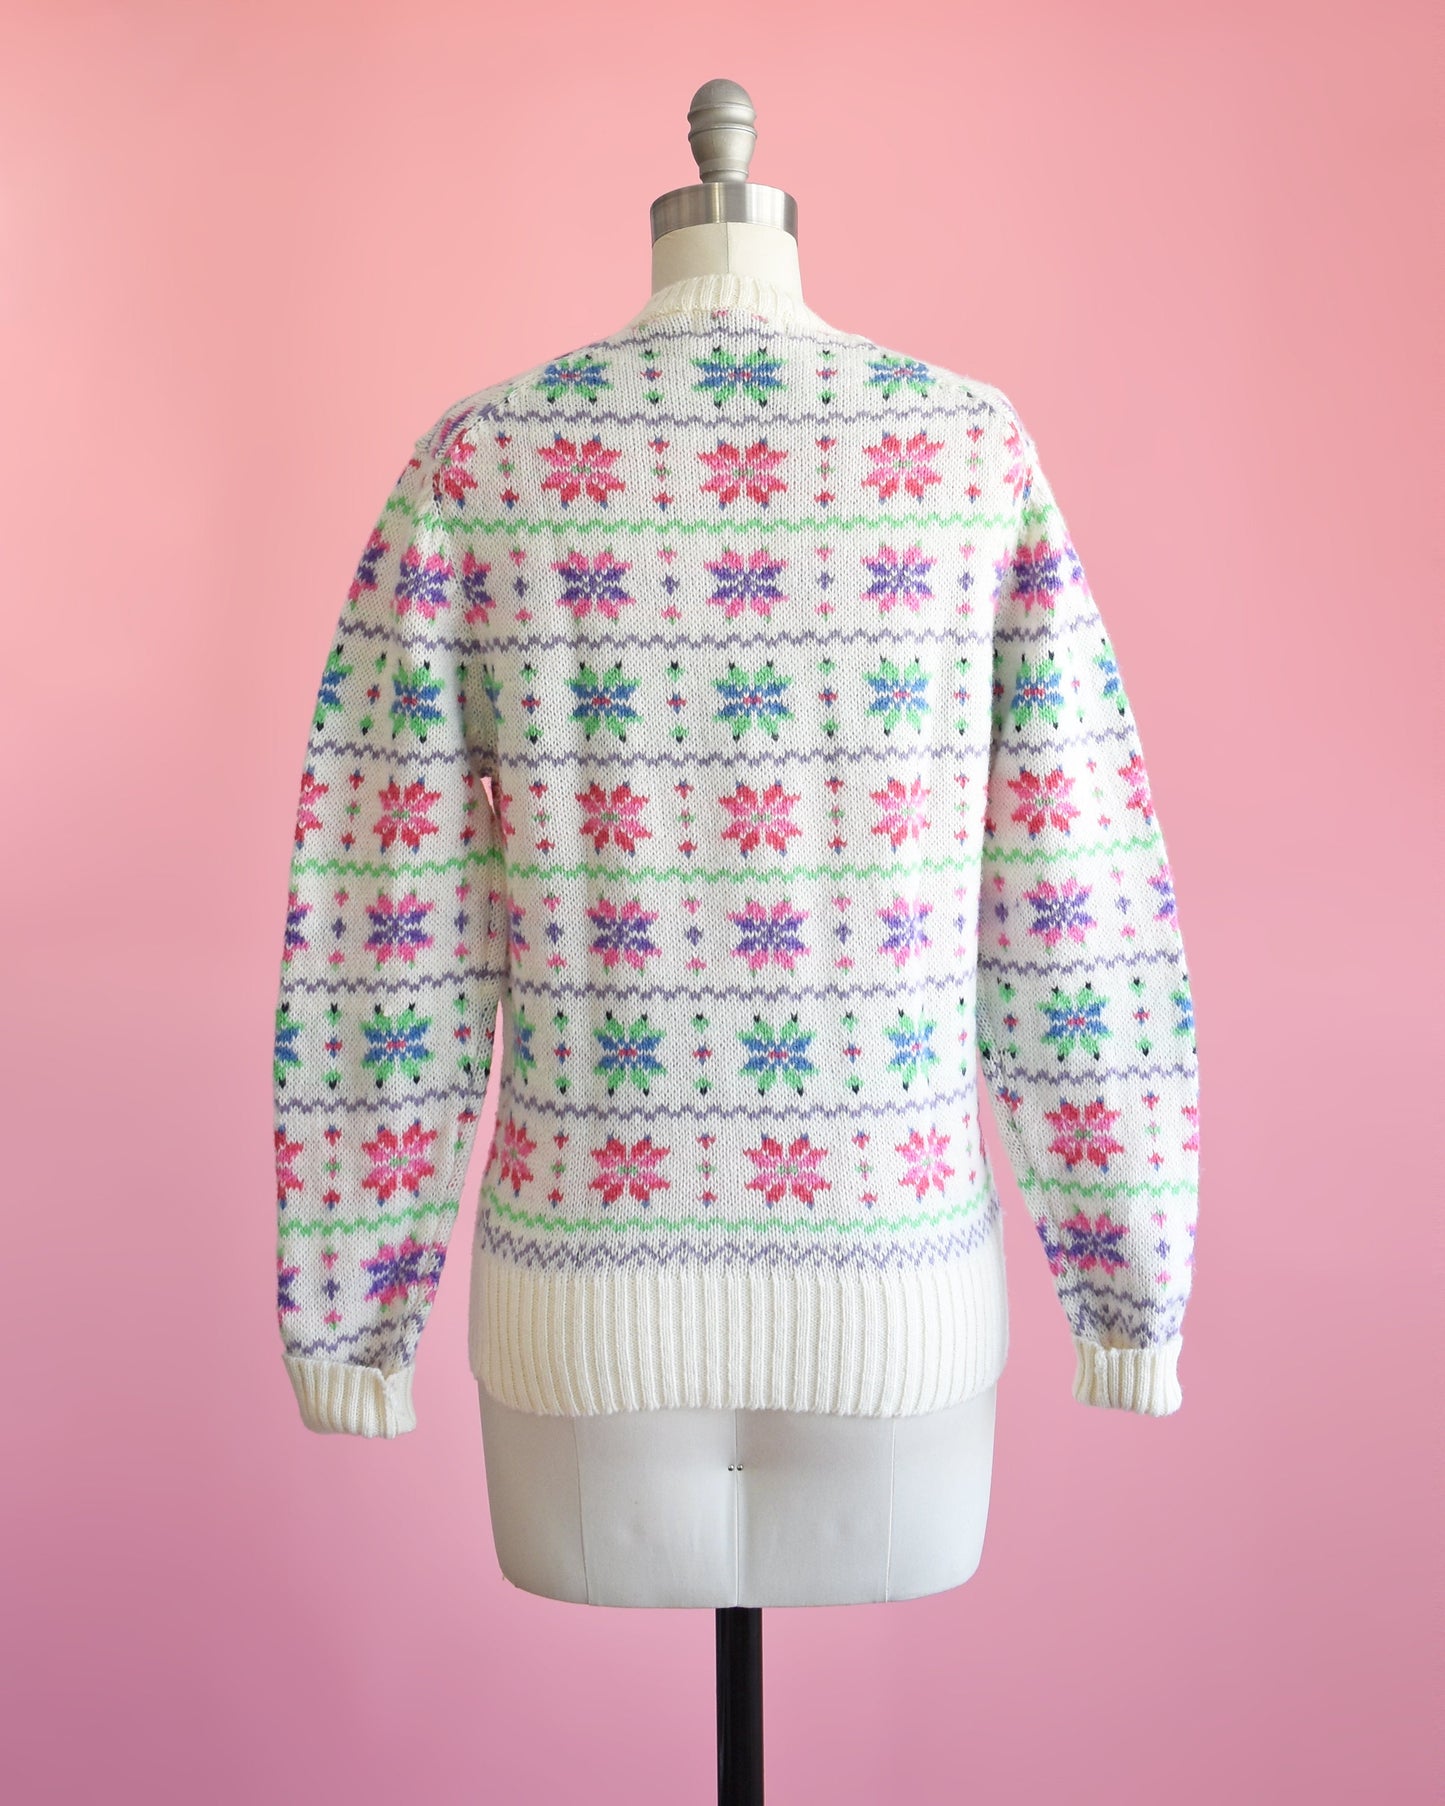 Back view of a vintage 80s white wool sweater with a green, pink, purple, and blue snowflake pattern on a dress form.